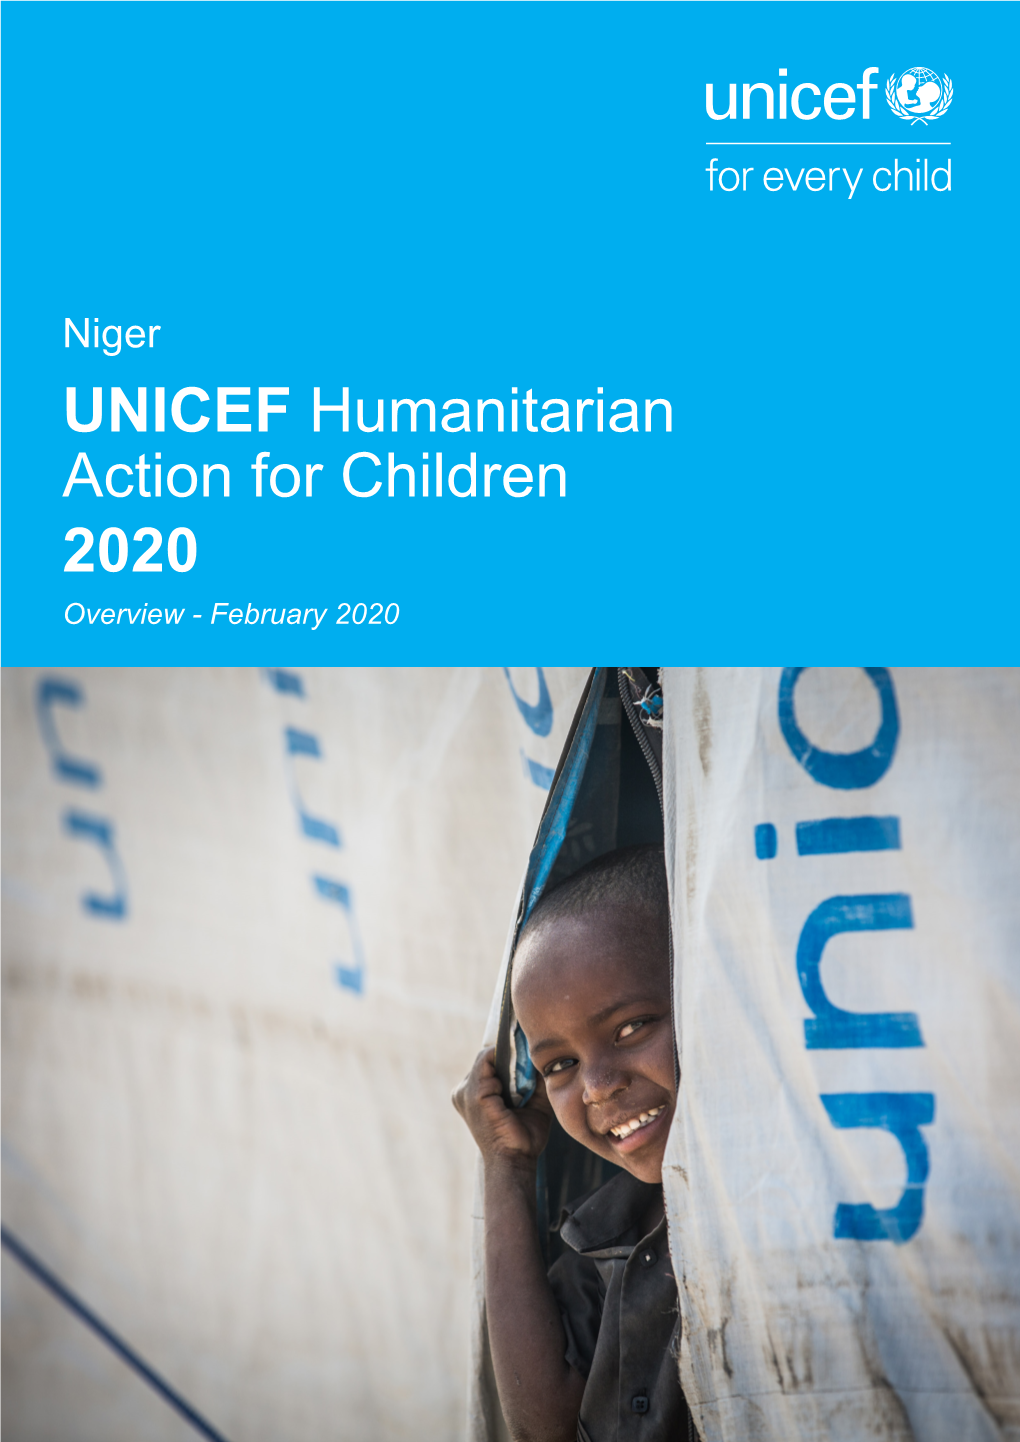 UNICEF Humanitarian Action for Children 2020 Overview - February 2020 for More Information